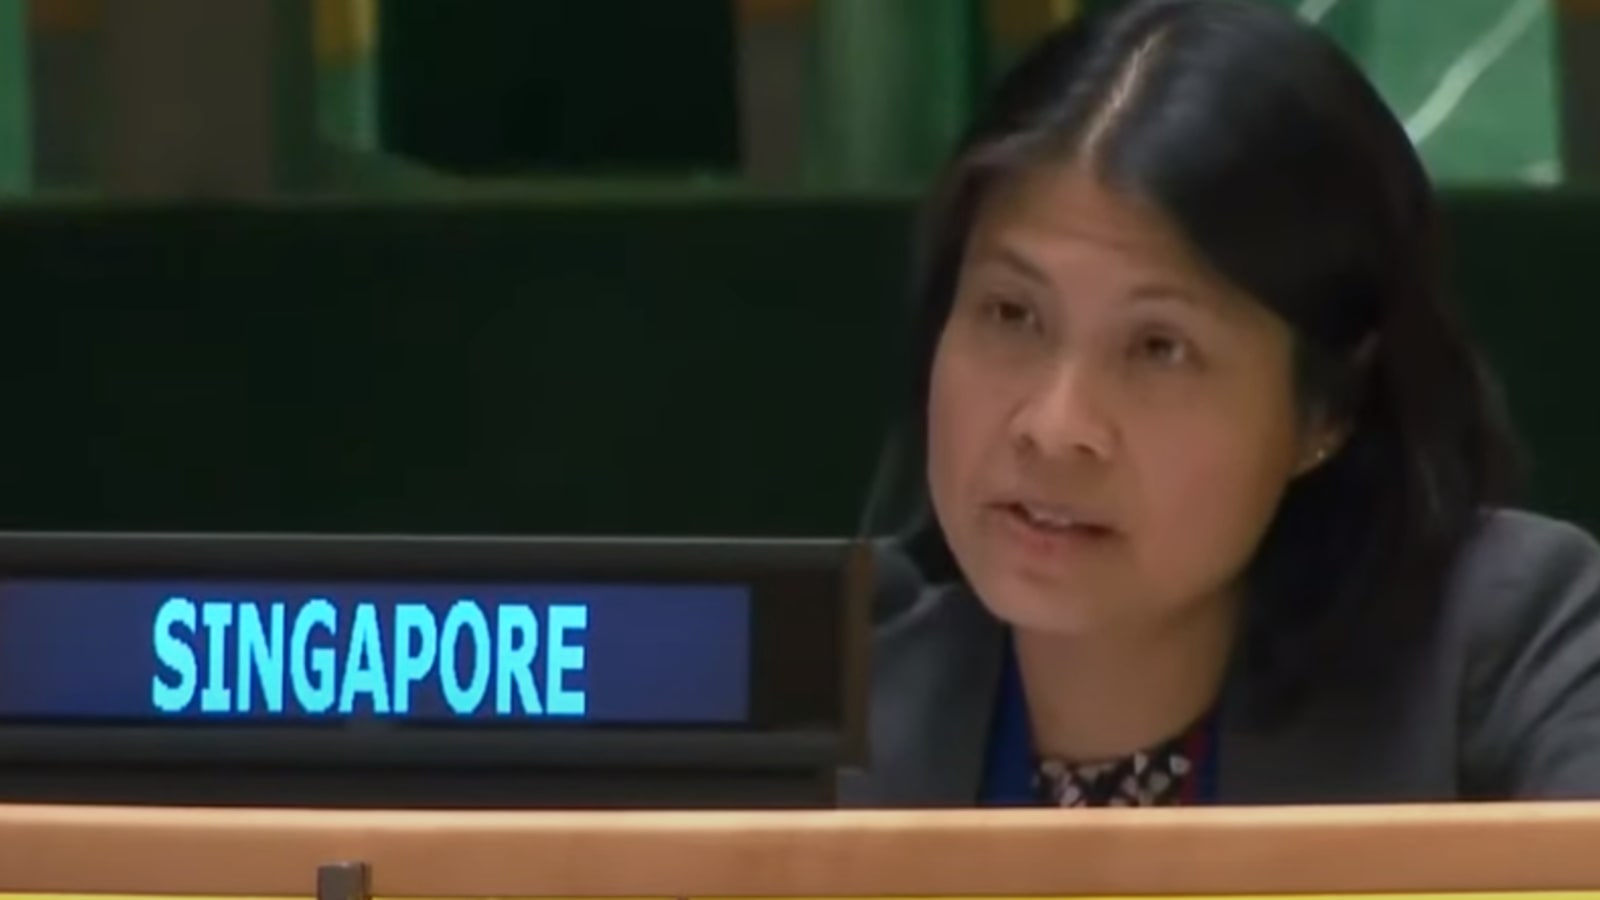 Singapore abstains from vote to suspend Russia from UN human rights body, urges support for inquiry on violations in Ukraine